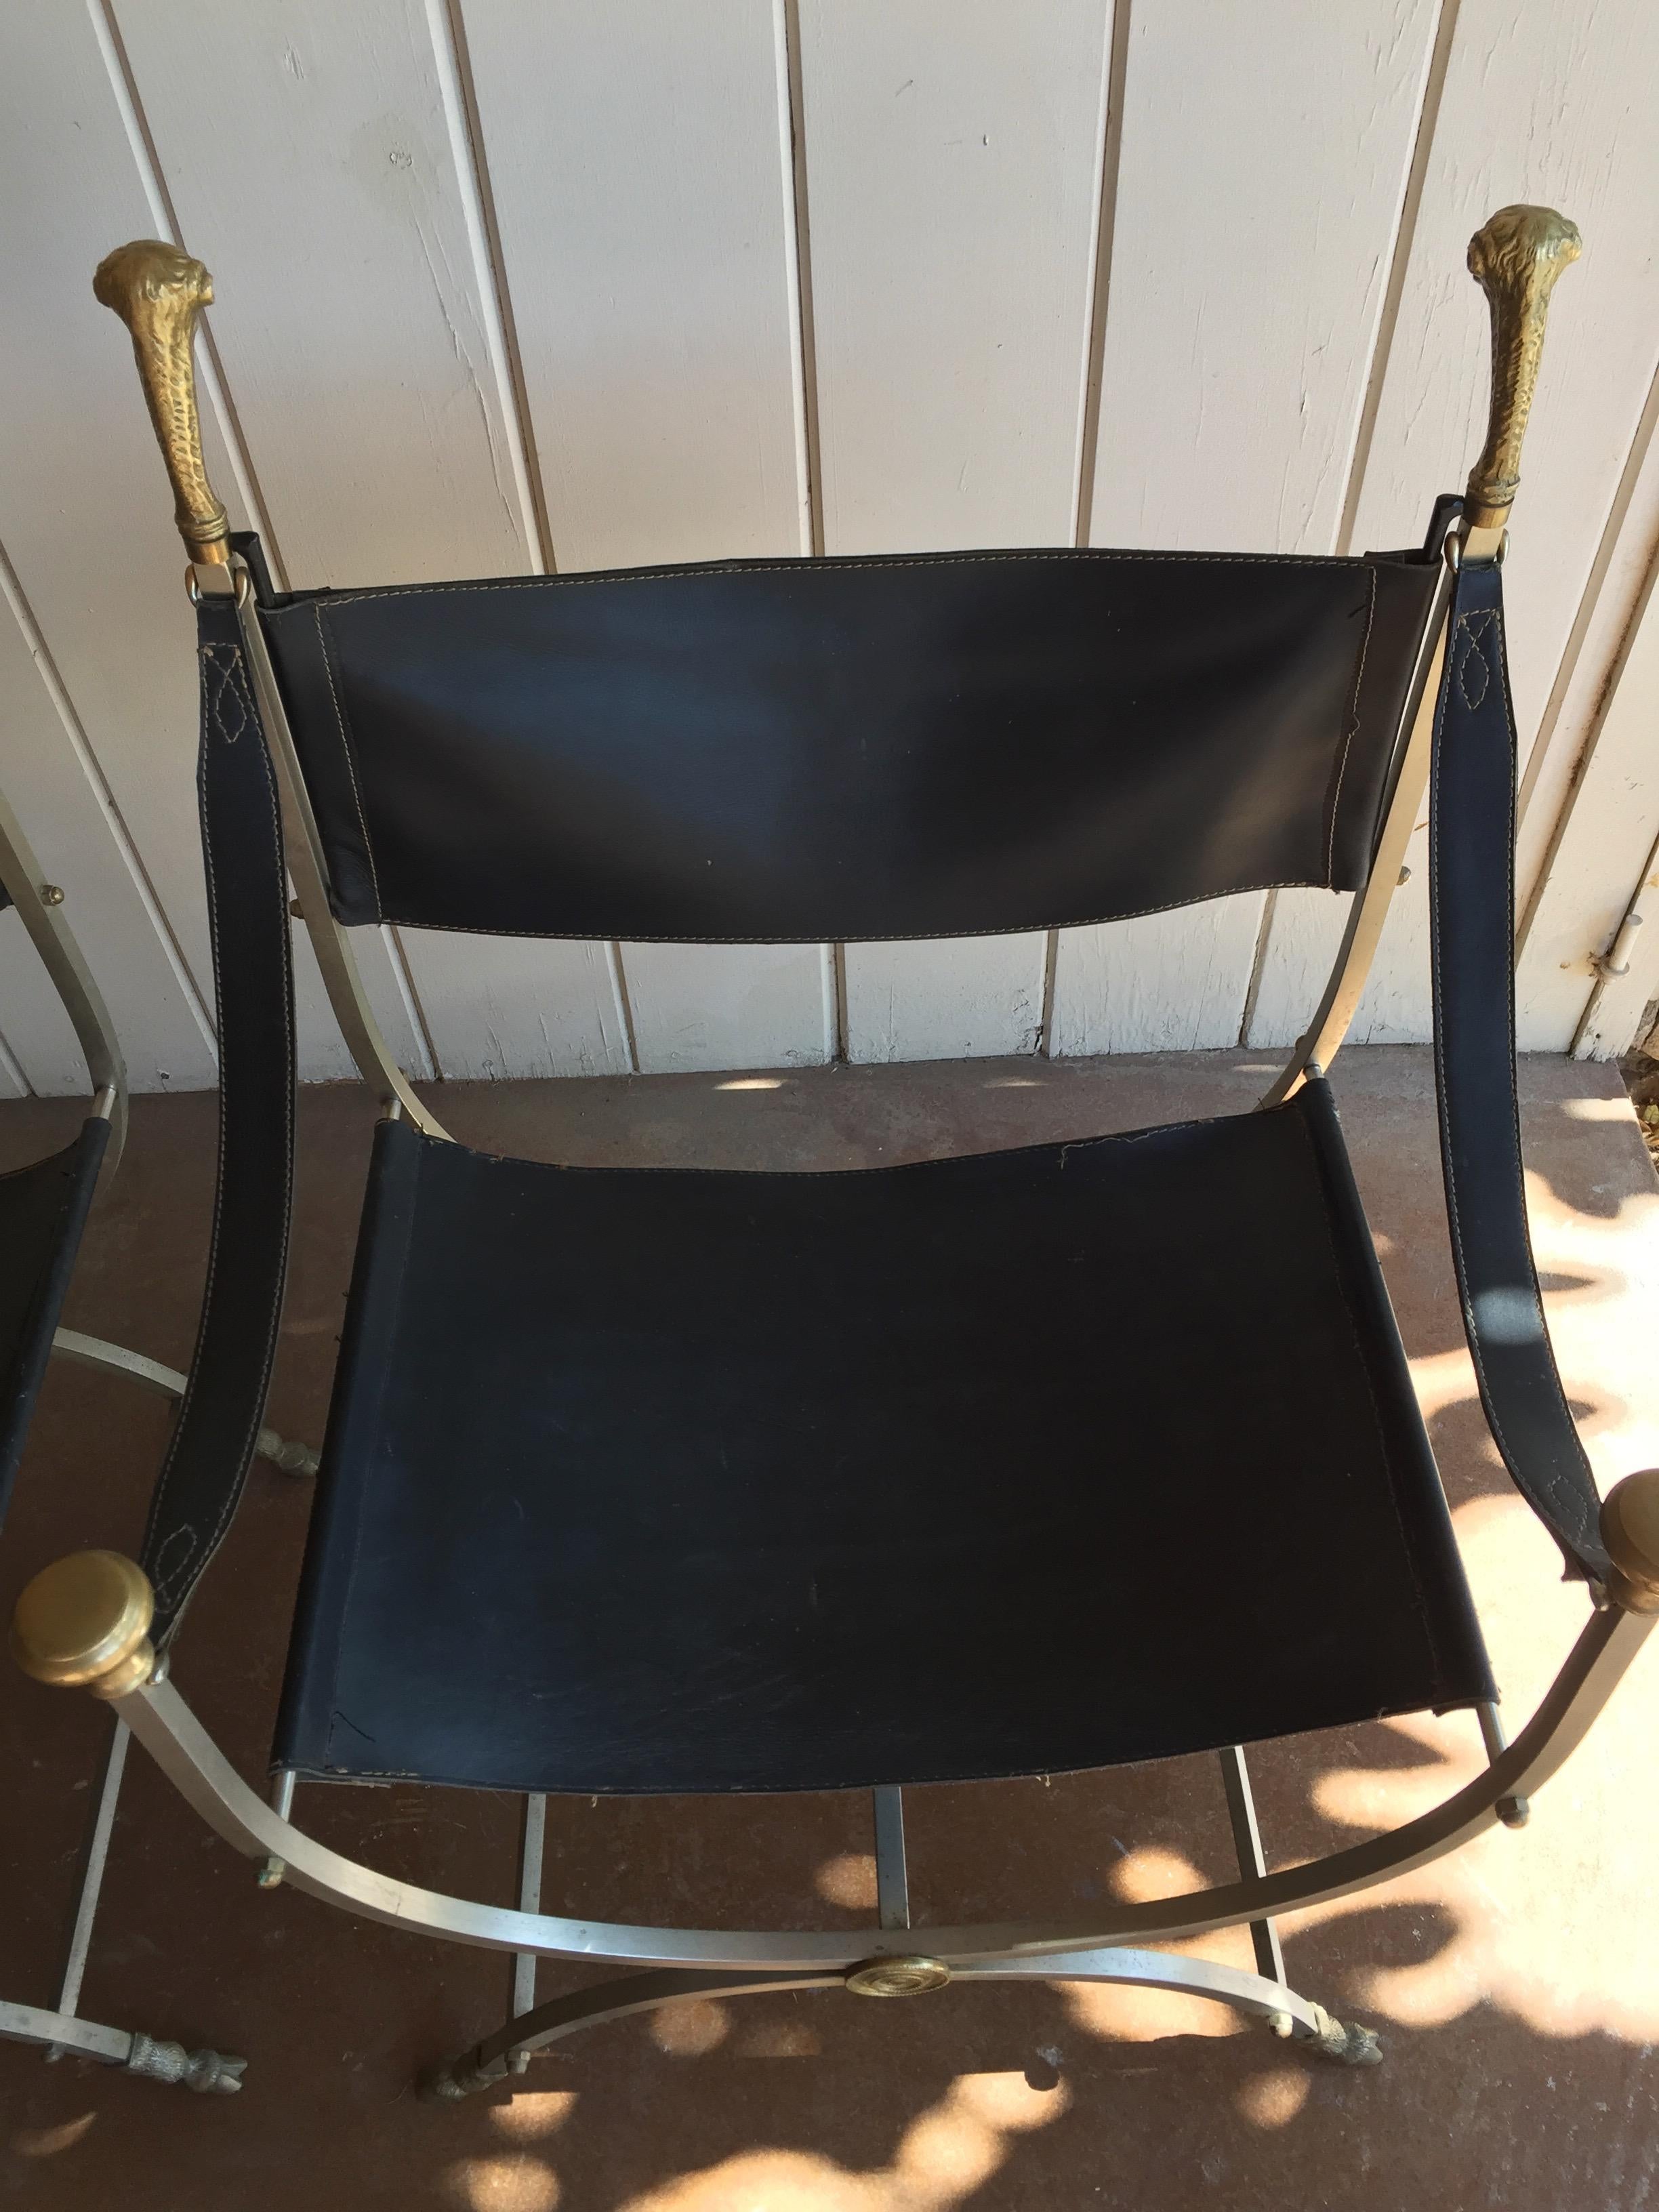 Pair of Maison Jansen Savonarola chairs, original chairs in very good condition acquired recently from an Estate in Arizona, one owner. This handsome pair is the perfect complement to any sophisticated room, flanking a doorway in the living room, to